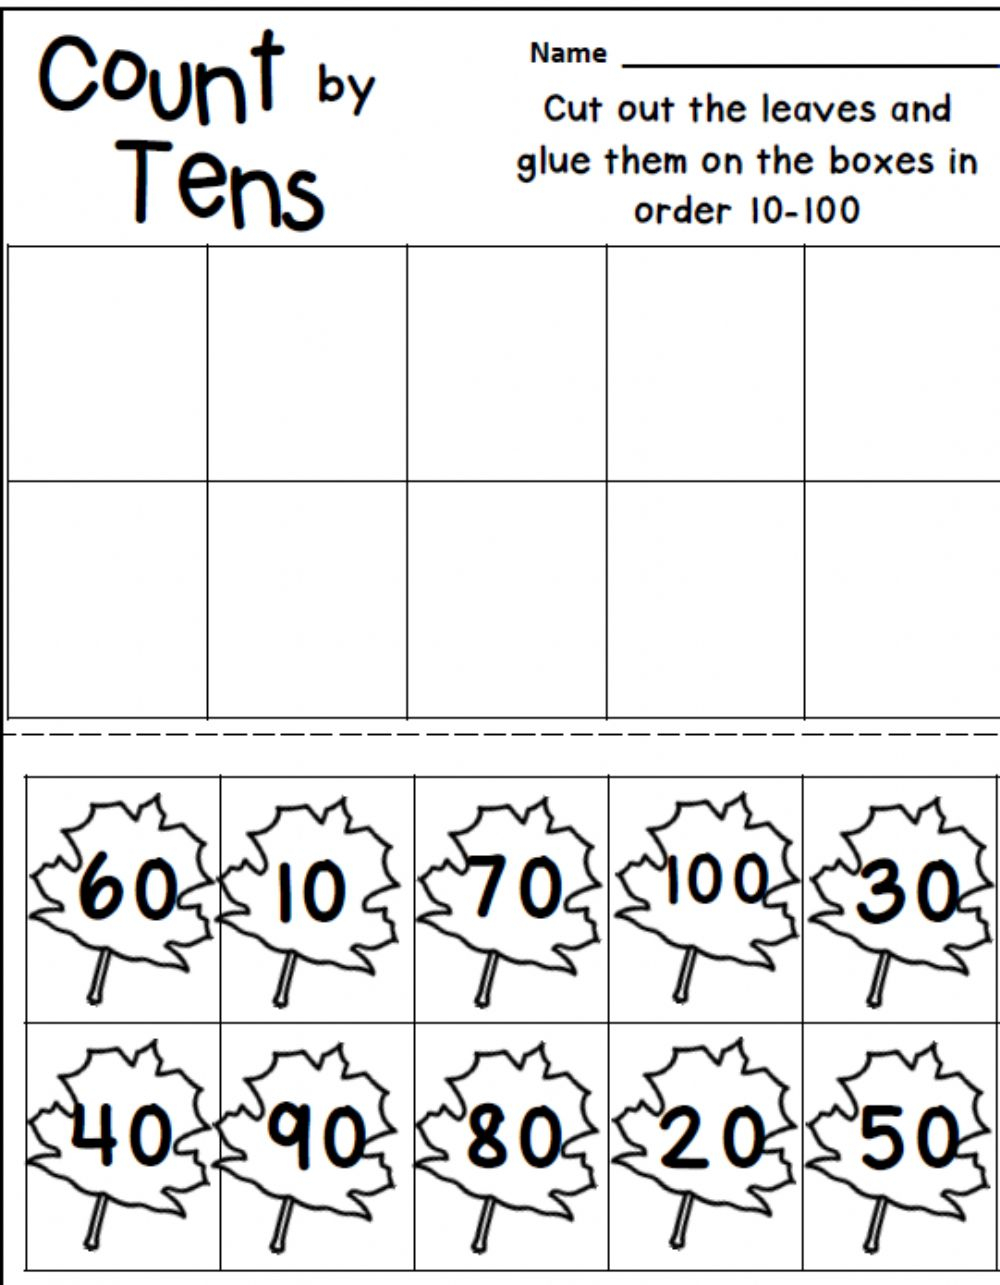 free-printable-counting-by-10-s-worksheets-countingworksheets